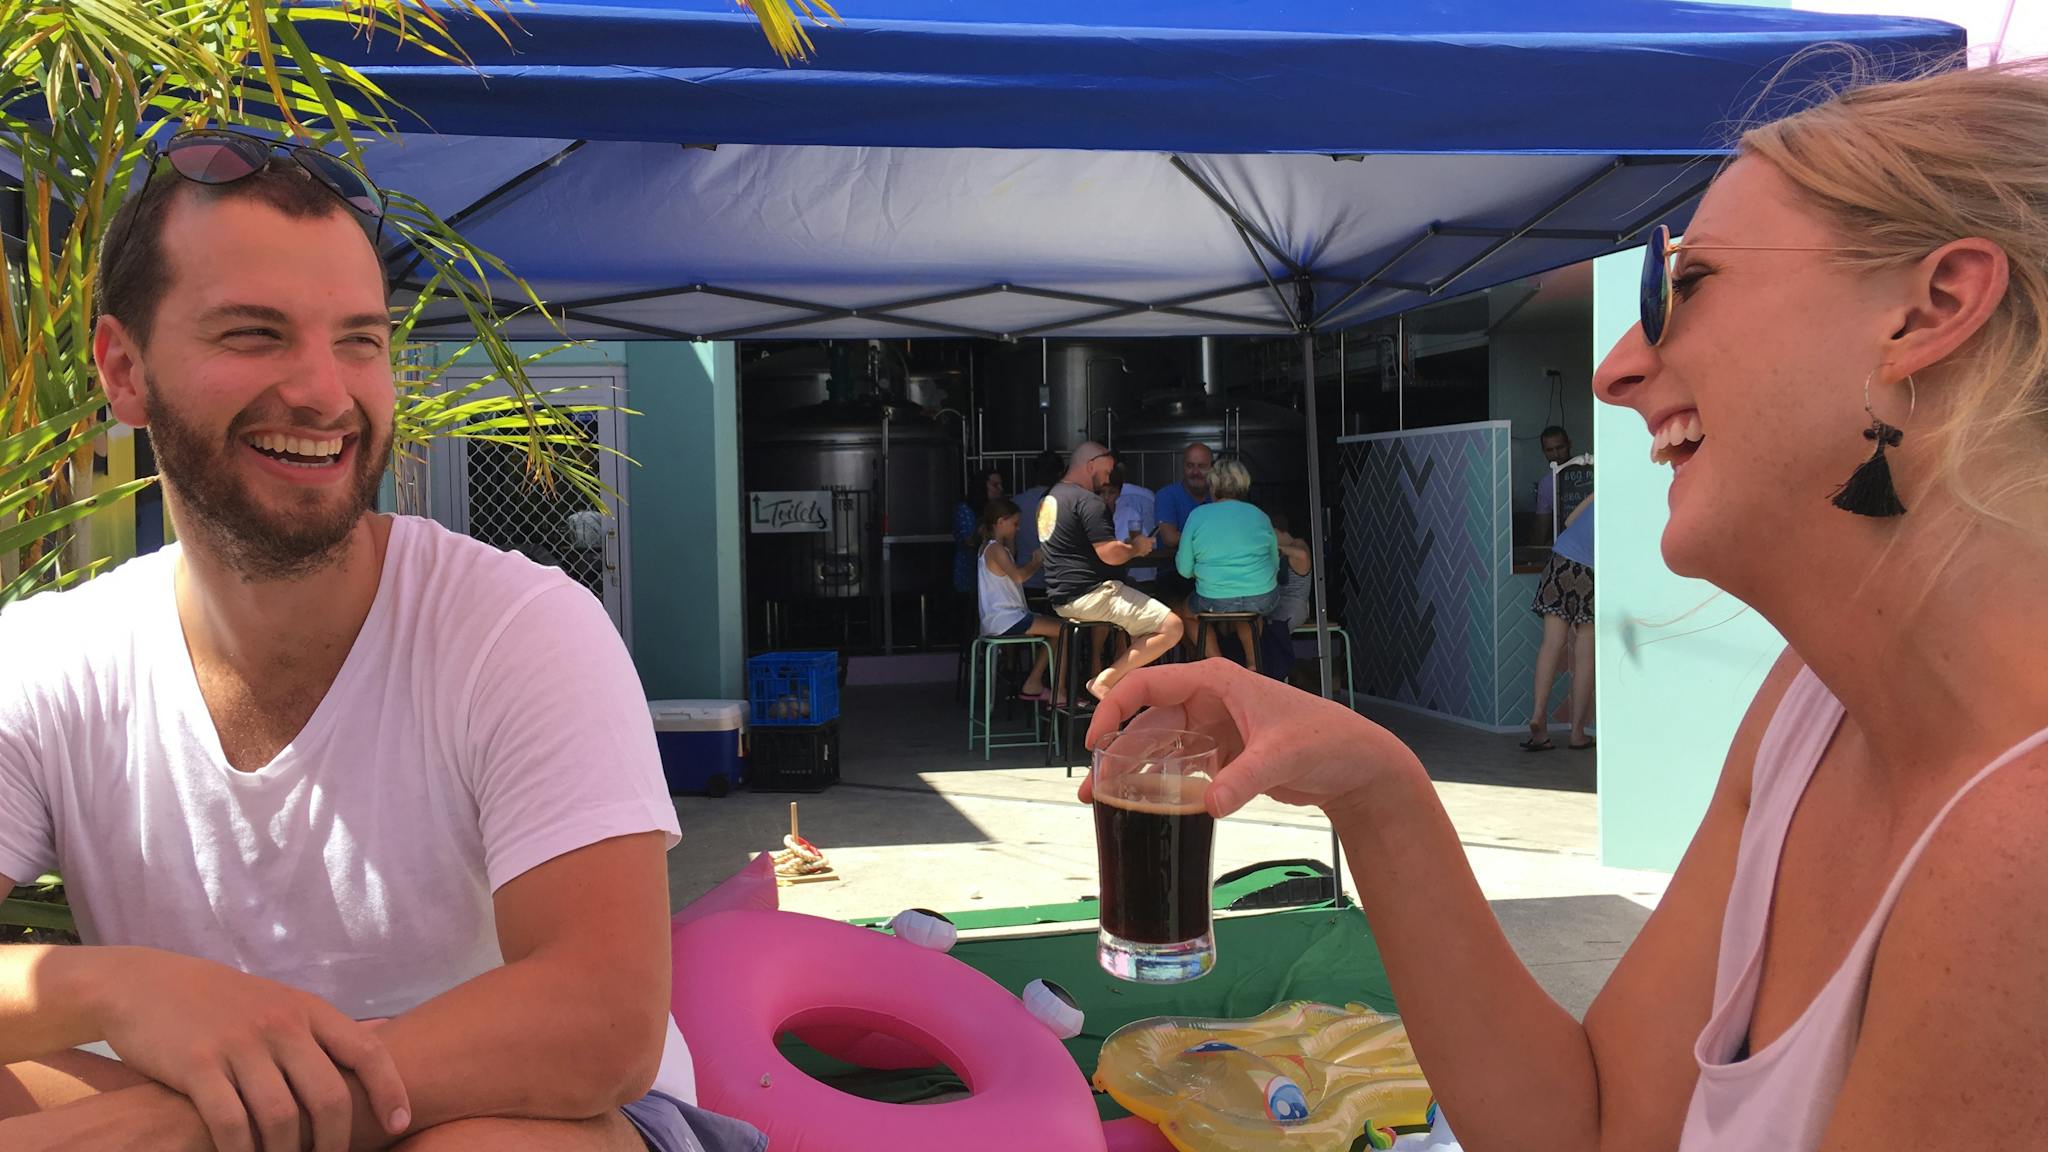 Hot sun and cold beers at Lost Palms